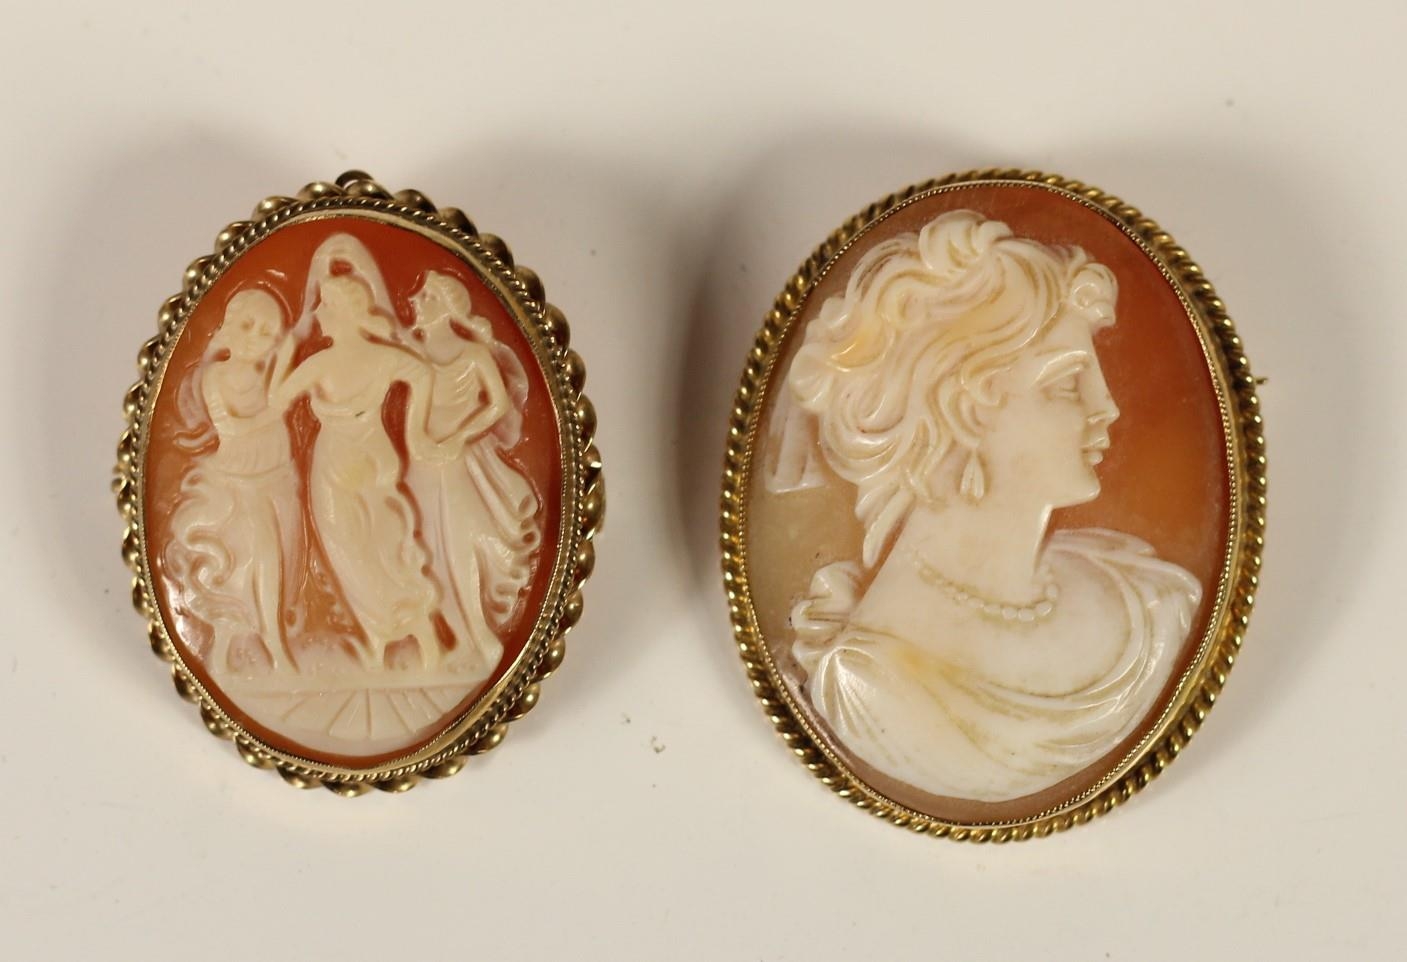 A 9ct gold mounted shell cameo brooch, depicting the Three Graces, 33 x 27mm and another depicting a